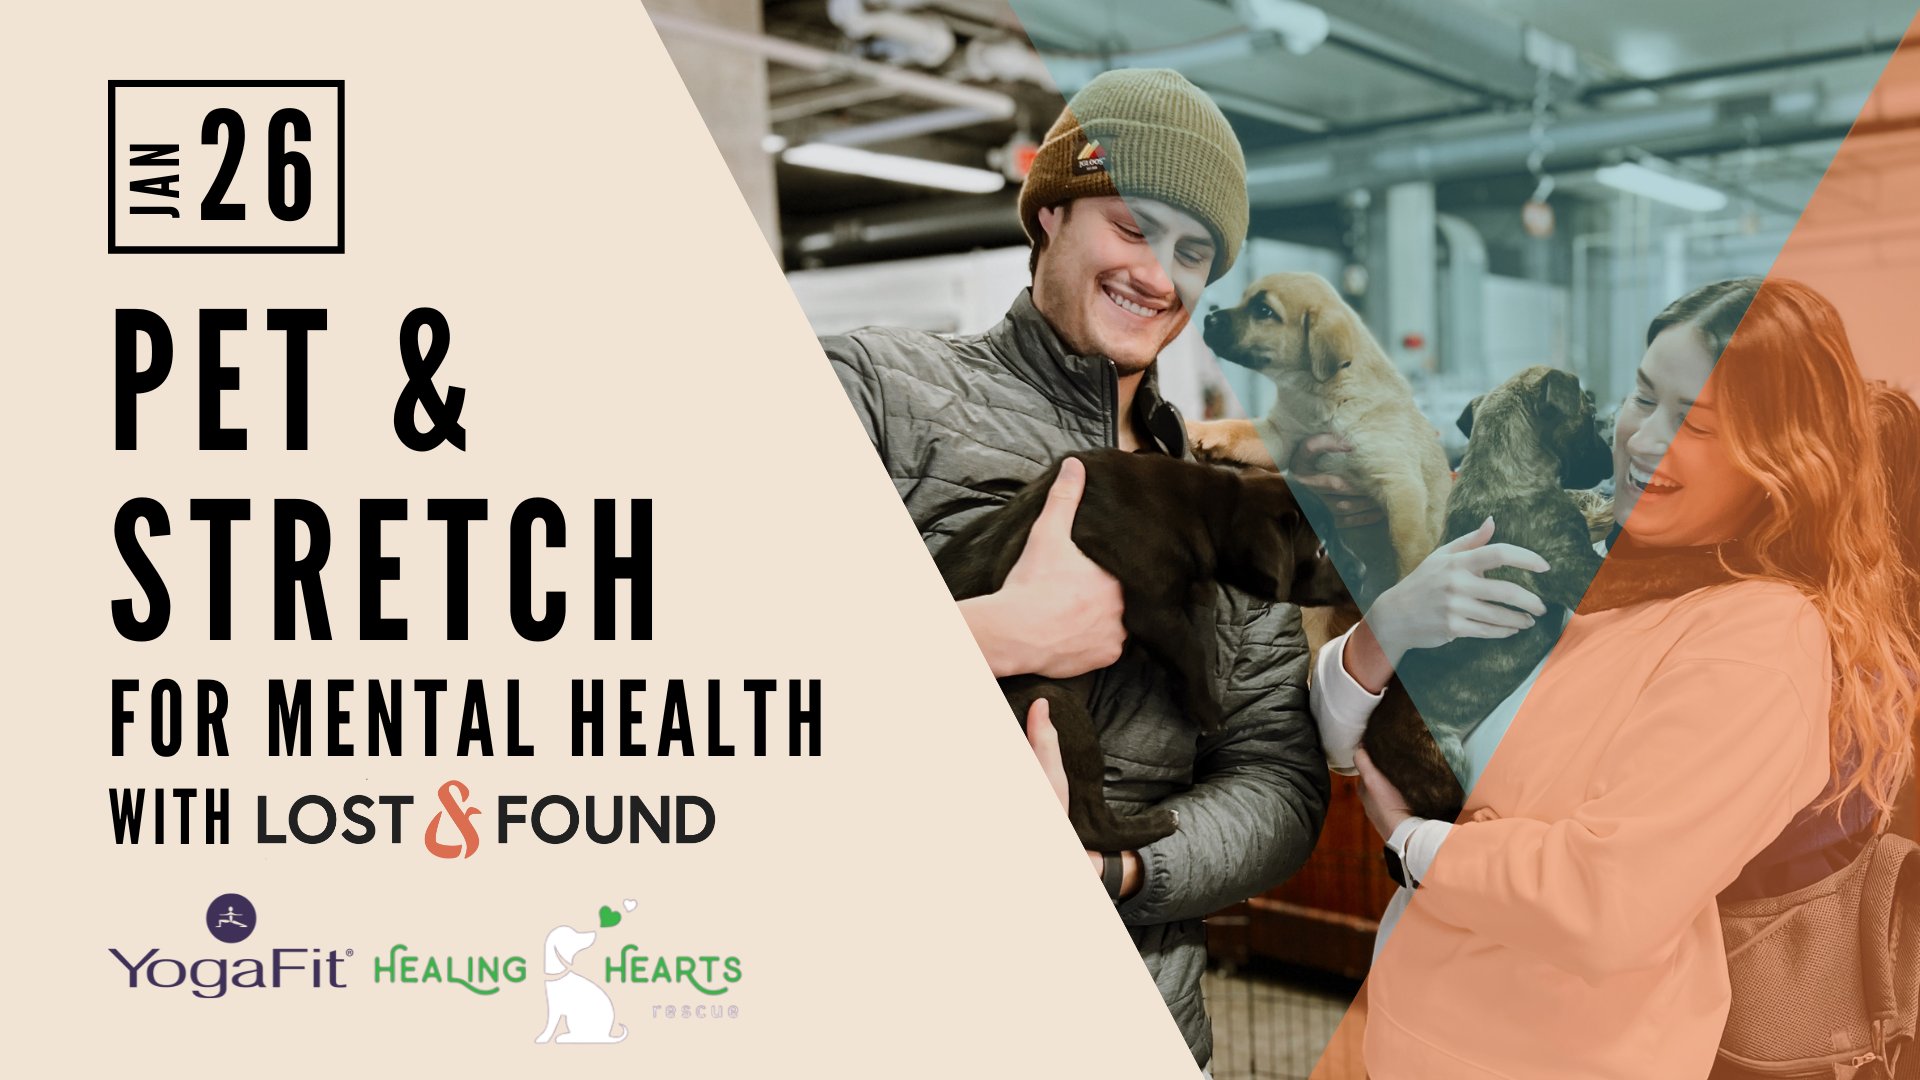 Pet & Stretch for Mental Health – banner image announcing event